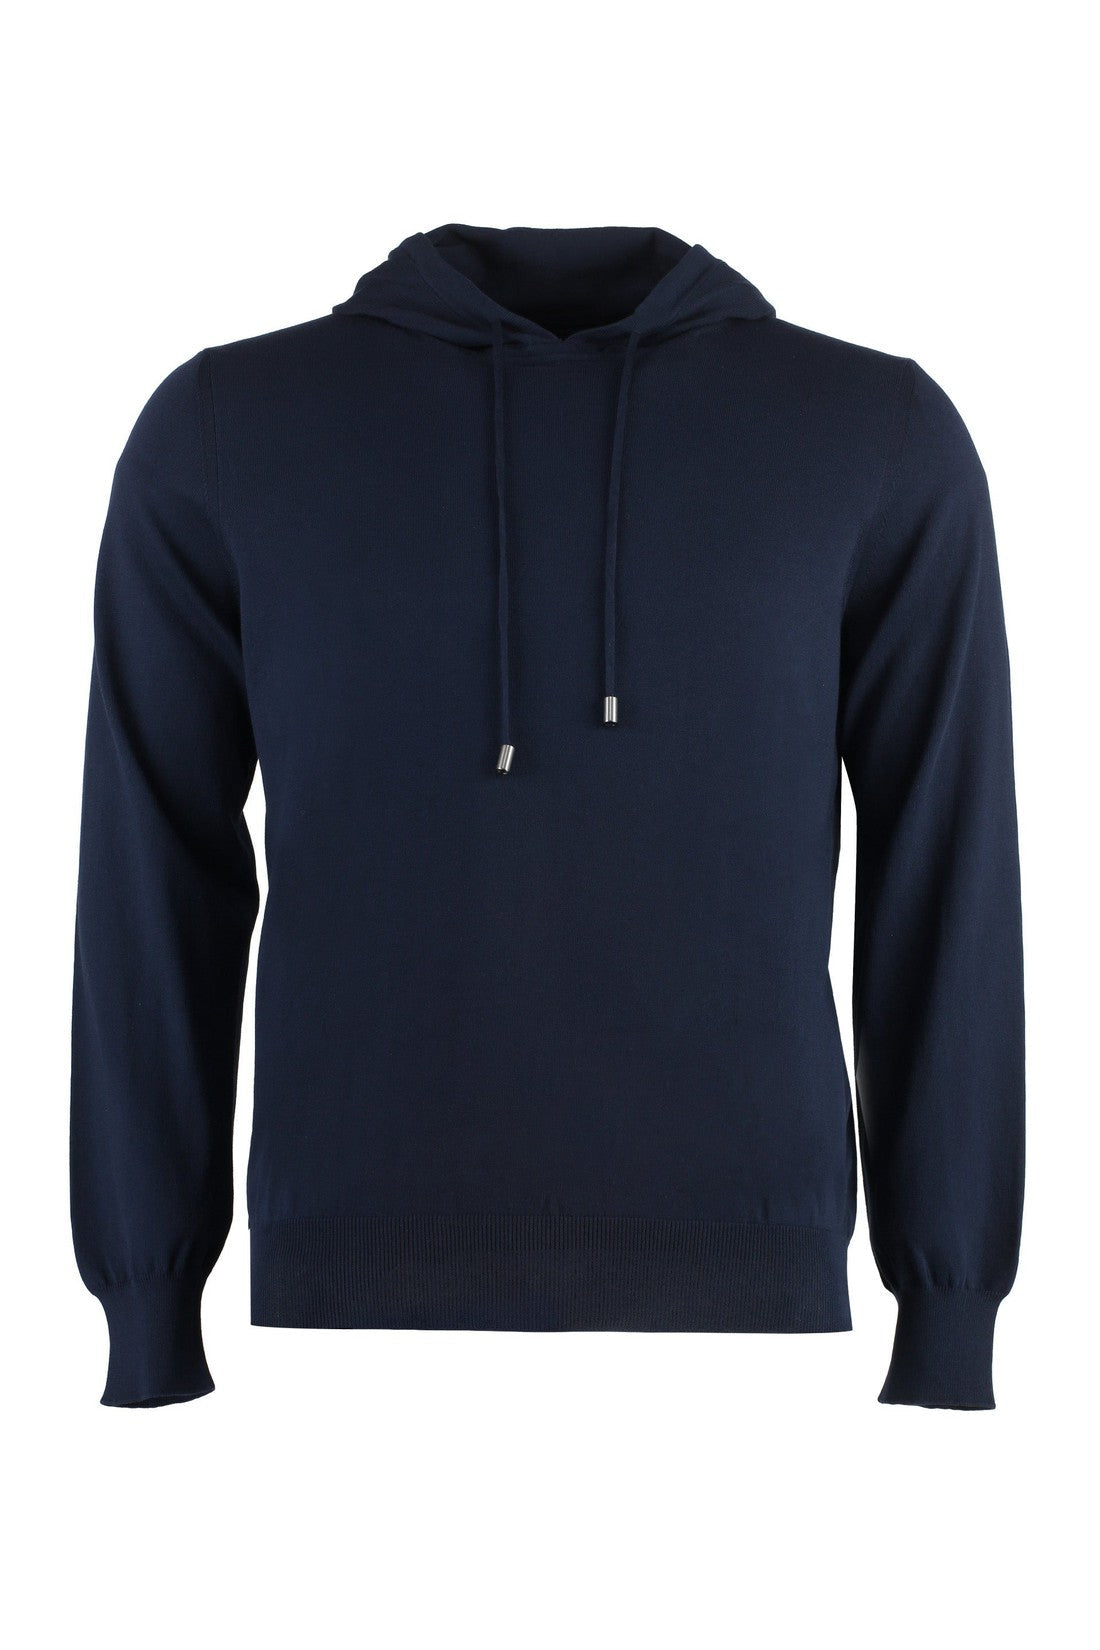 Canali-OUTLET-SALE-Knitted hoodie-ARCHIVIST